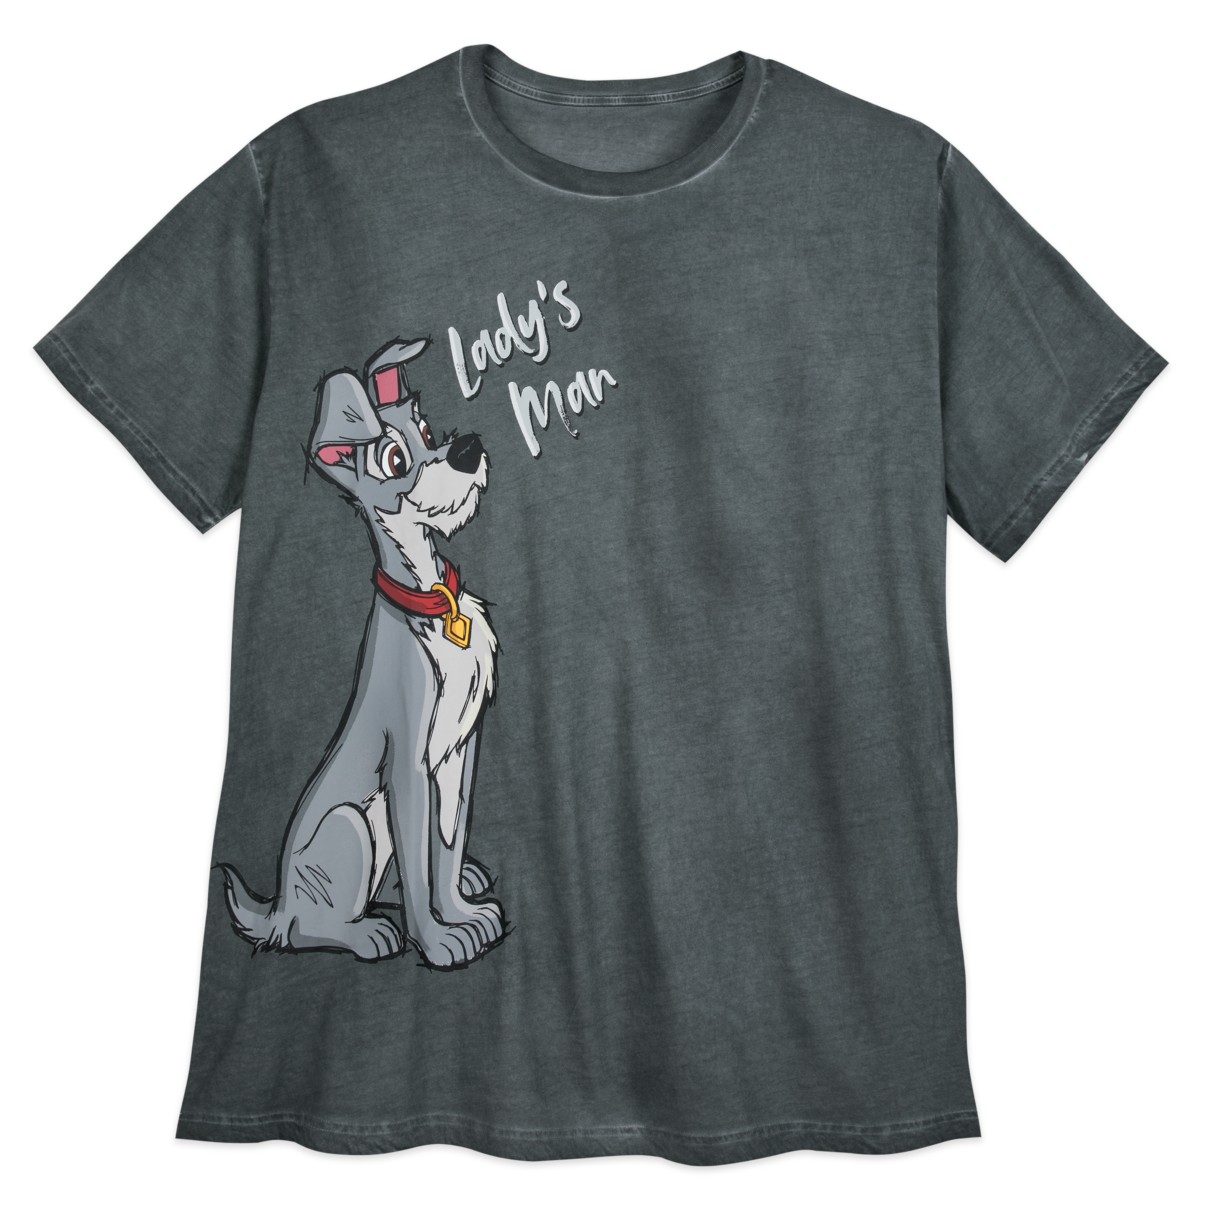 Tramp ''Lady's Man'' T-Shirt for Men – Lady and the Tramp – Extended Size